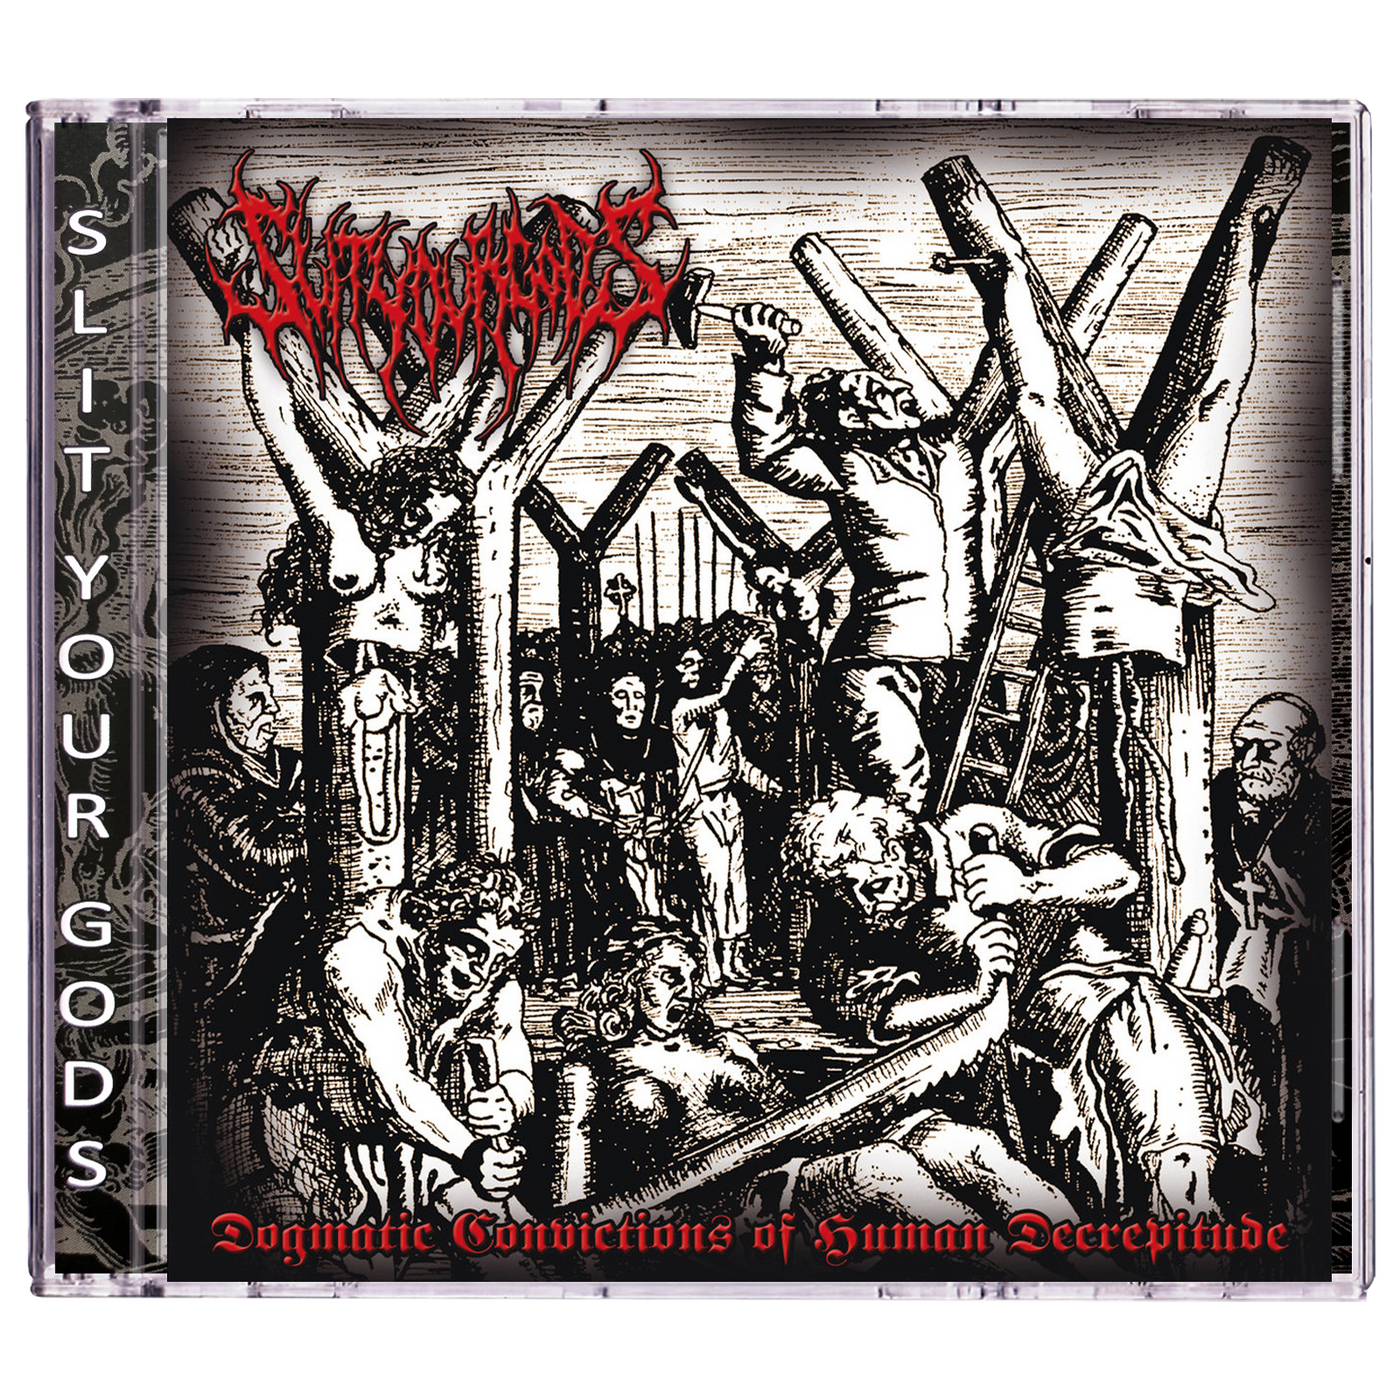 Slit Your Gods 'Dogmatic Convictions of Human Decrepitude' CD